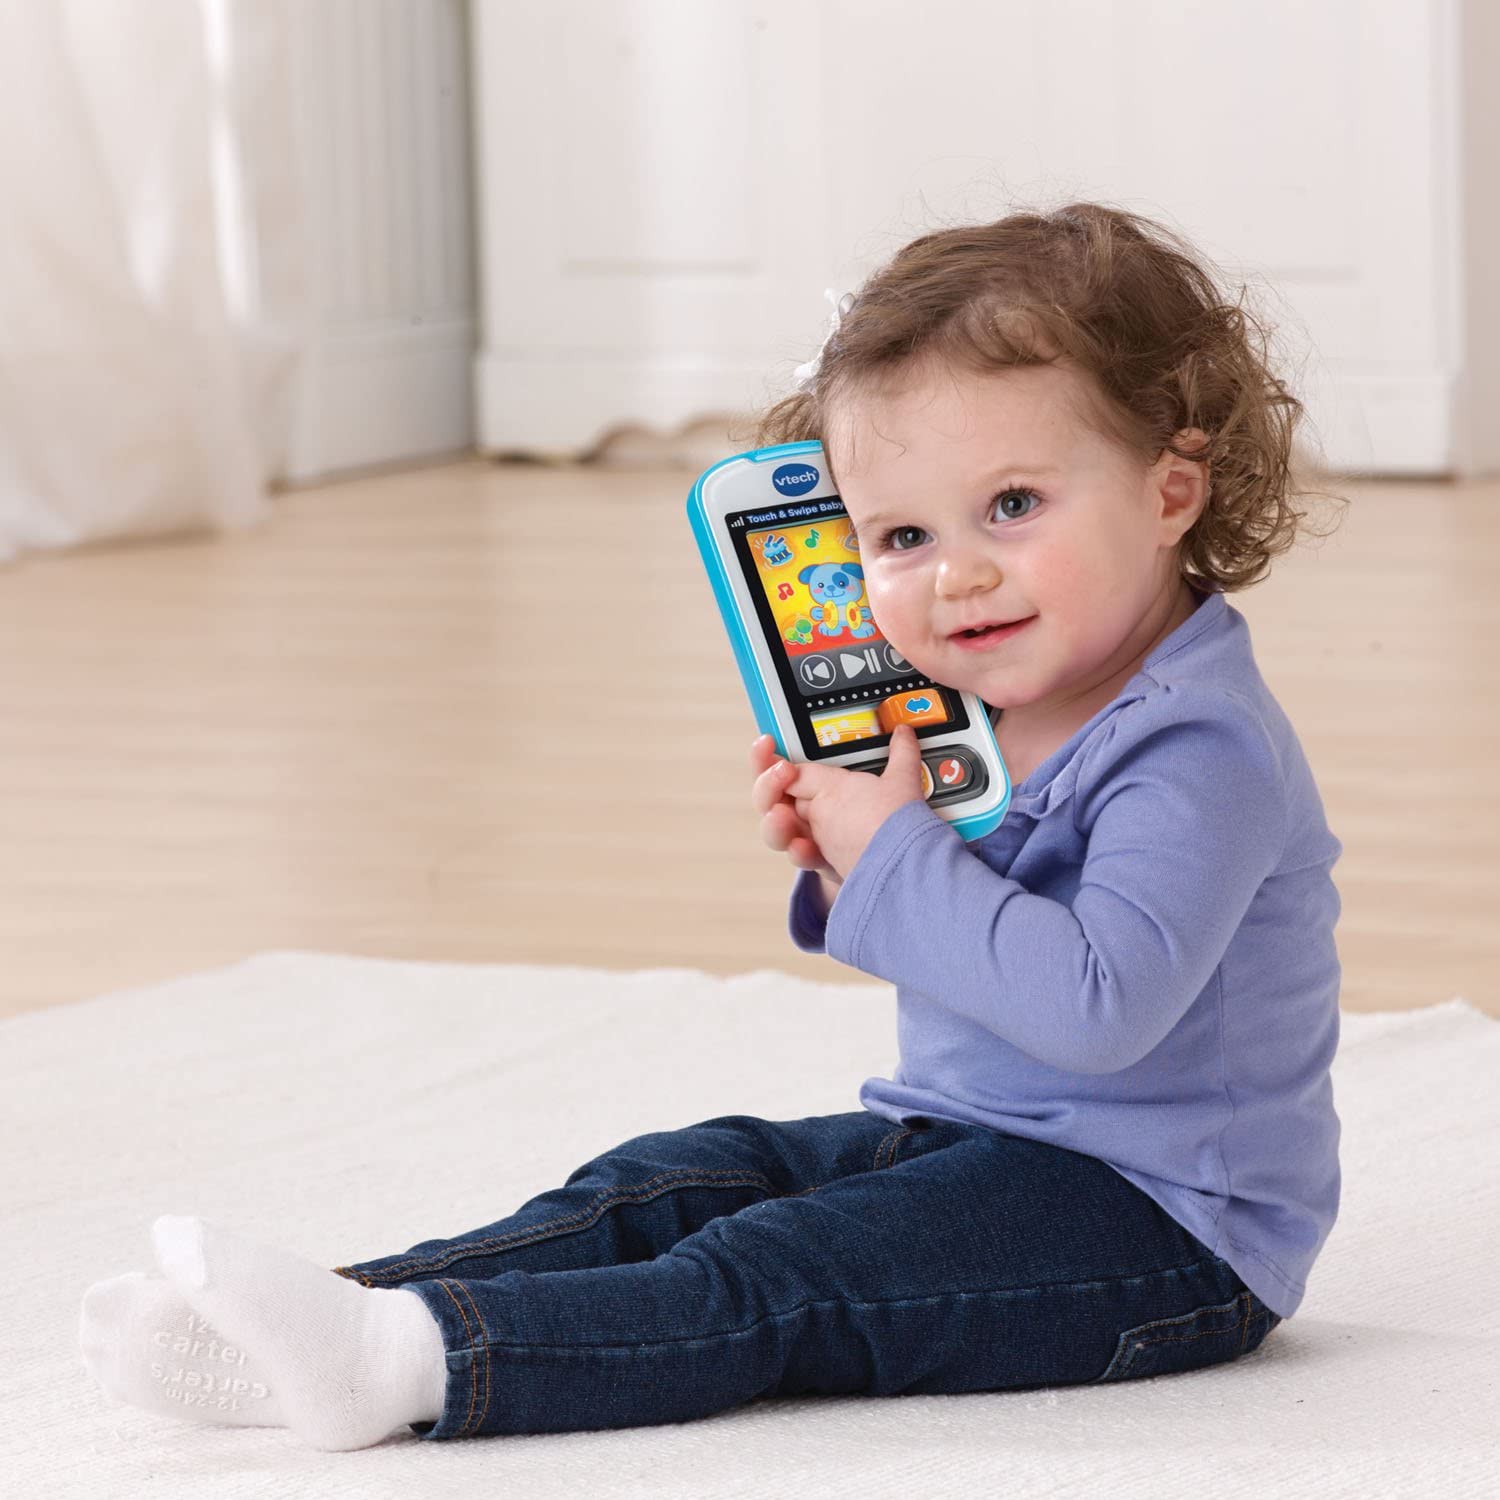 VTech Touch and Swipe Baby Phone, Blue - with 12 Light-Up Pretend Apps